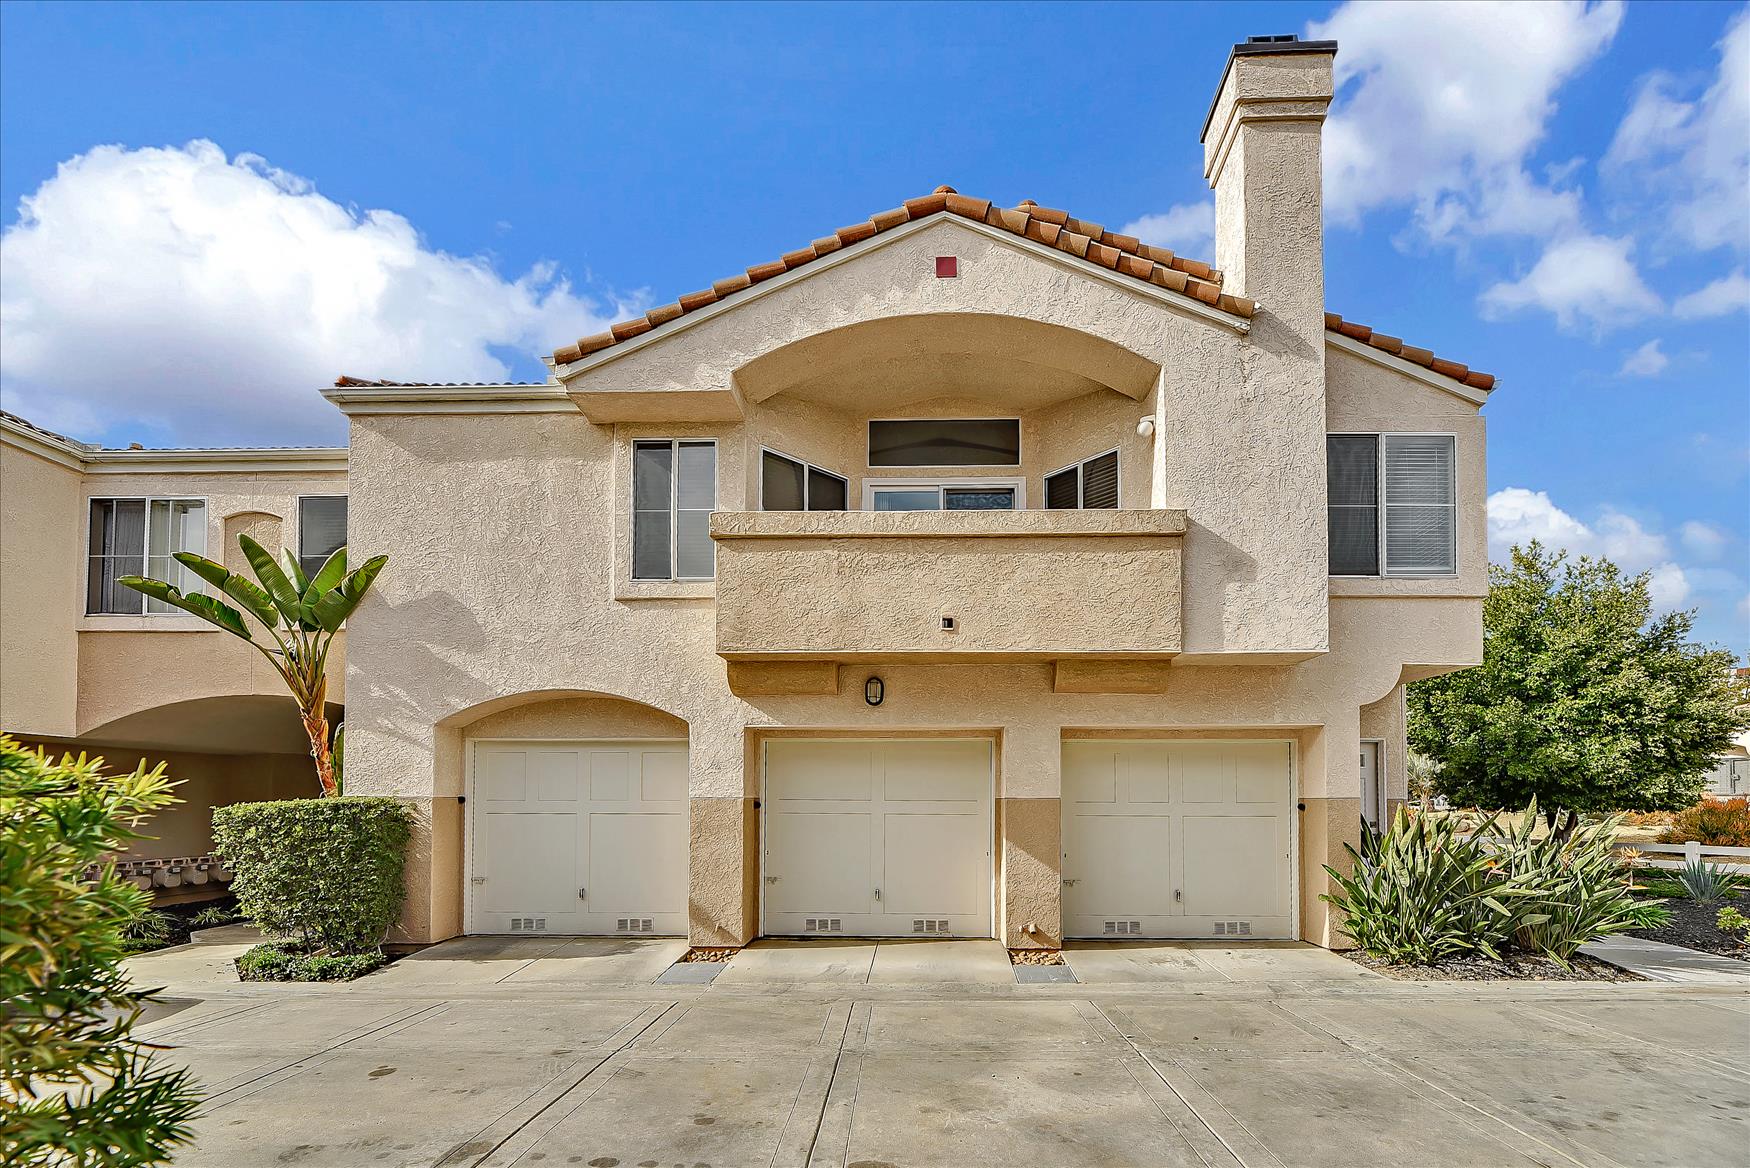 Beautiful Chula Vista, CA house showcasing the best property management services